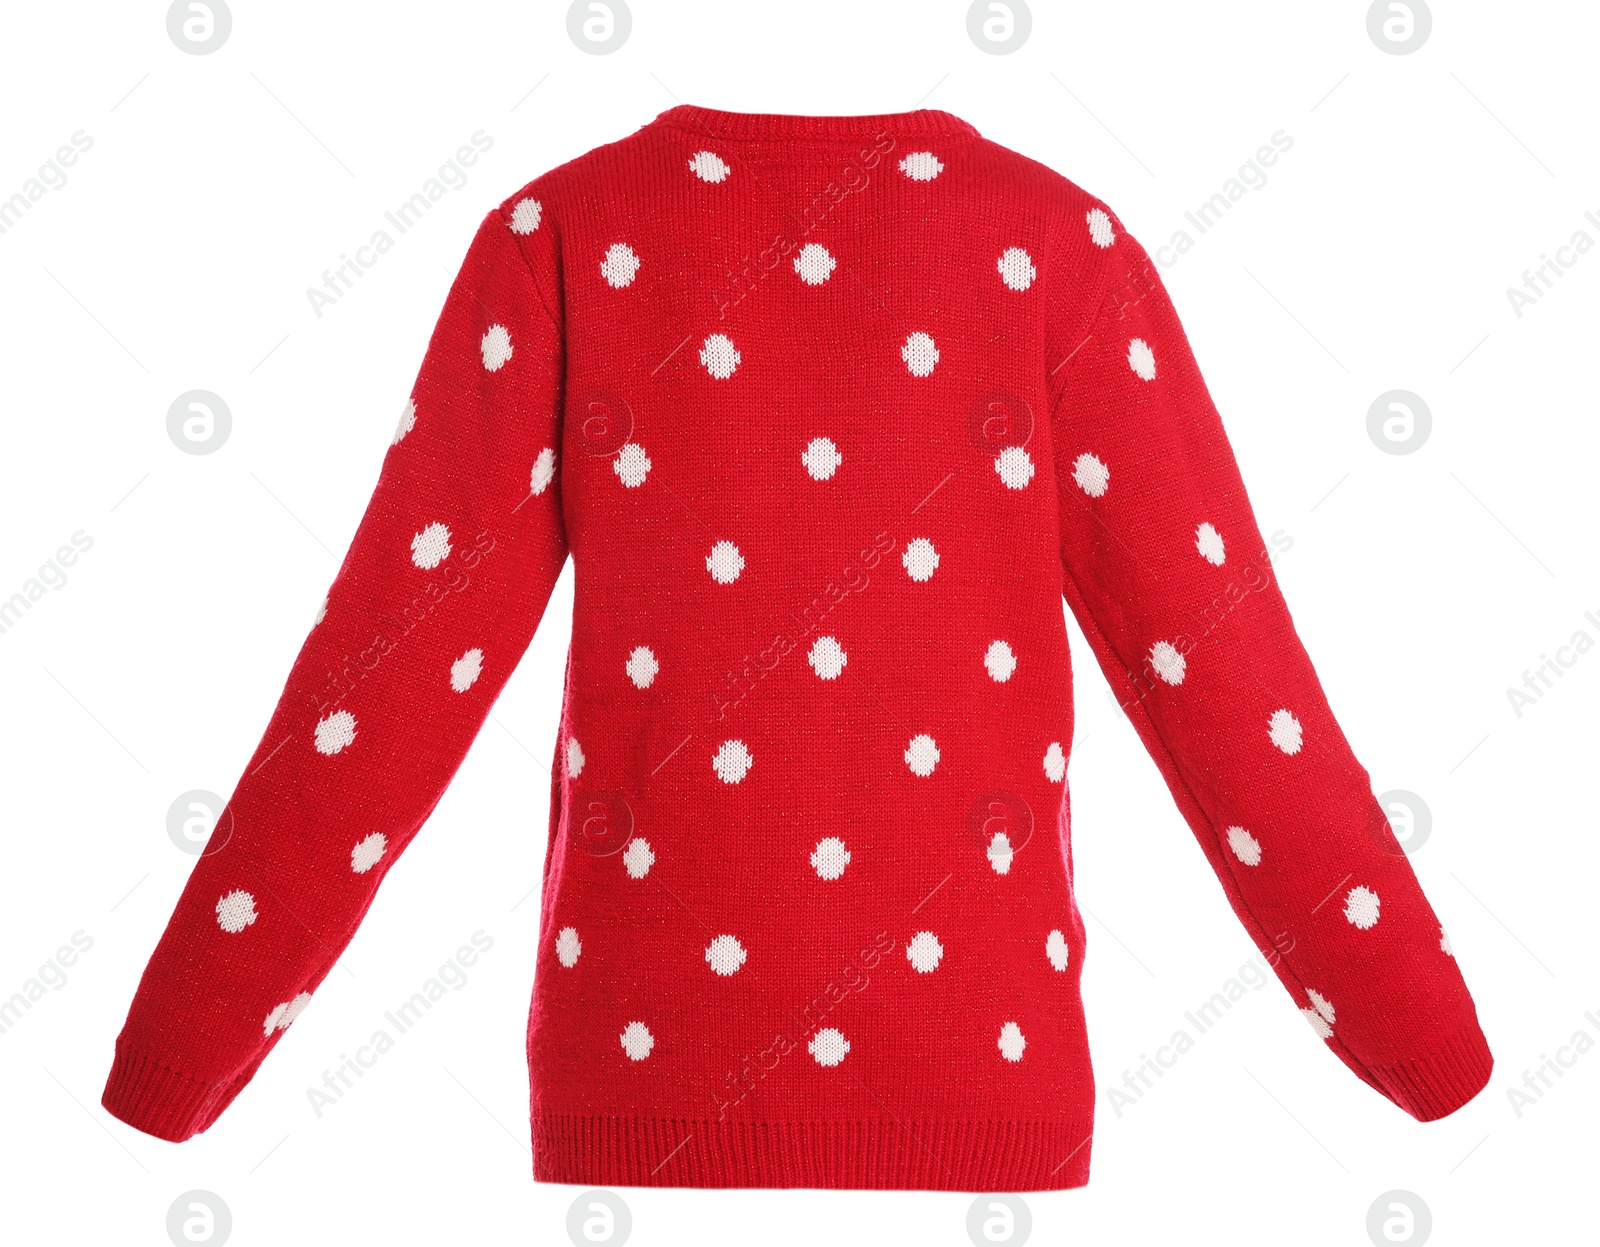 Image of Warm red Christmas sweater on white background, back side